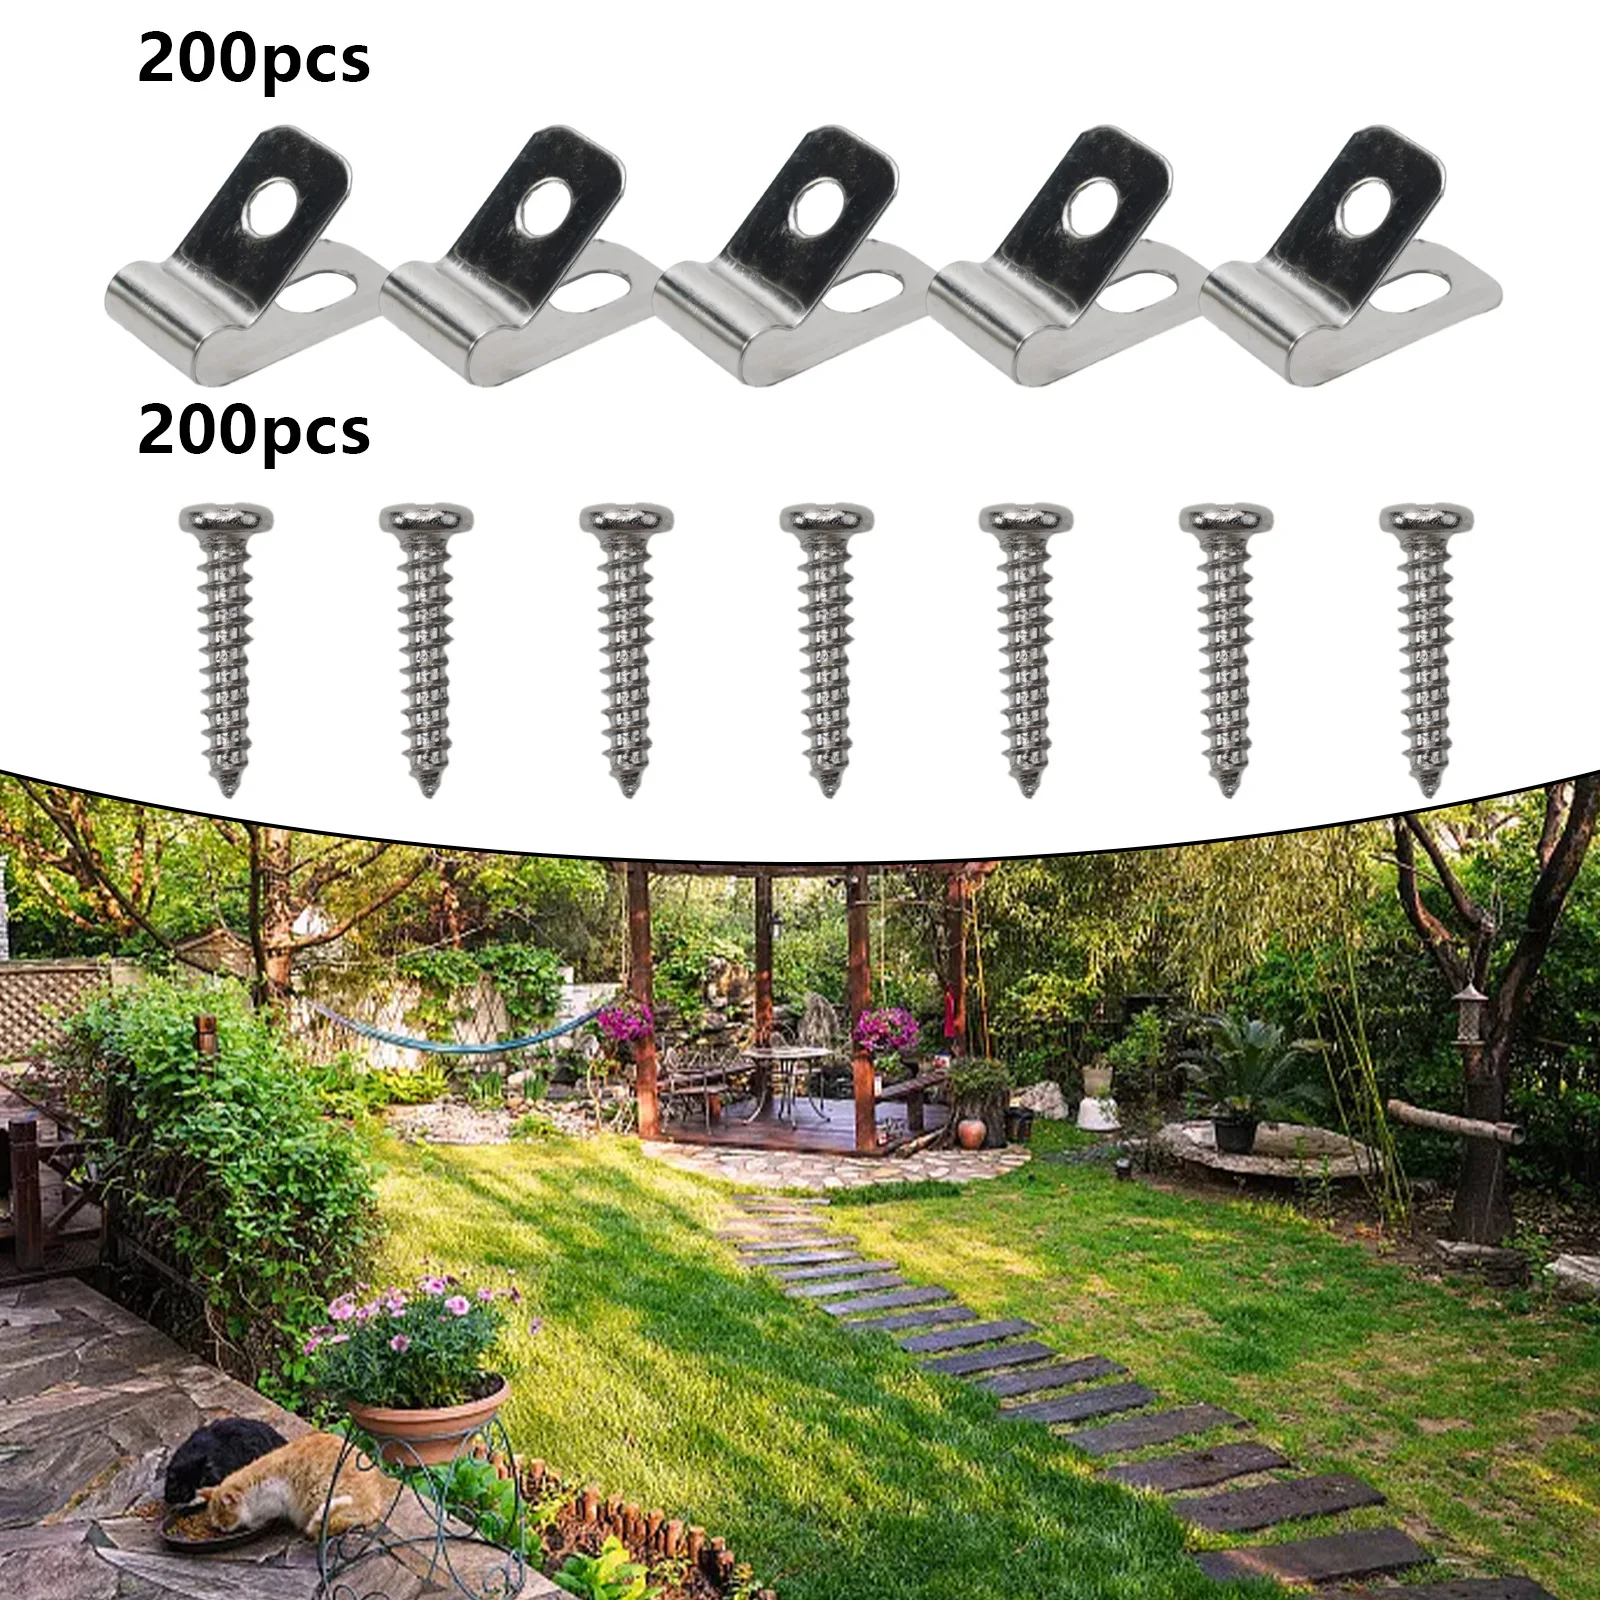 100/200pcs Garden Fence Wire Mounting Clip Agricultural Fencing Mounting Clips Stainless Steel Aluminum Wire Fence Fasteners